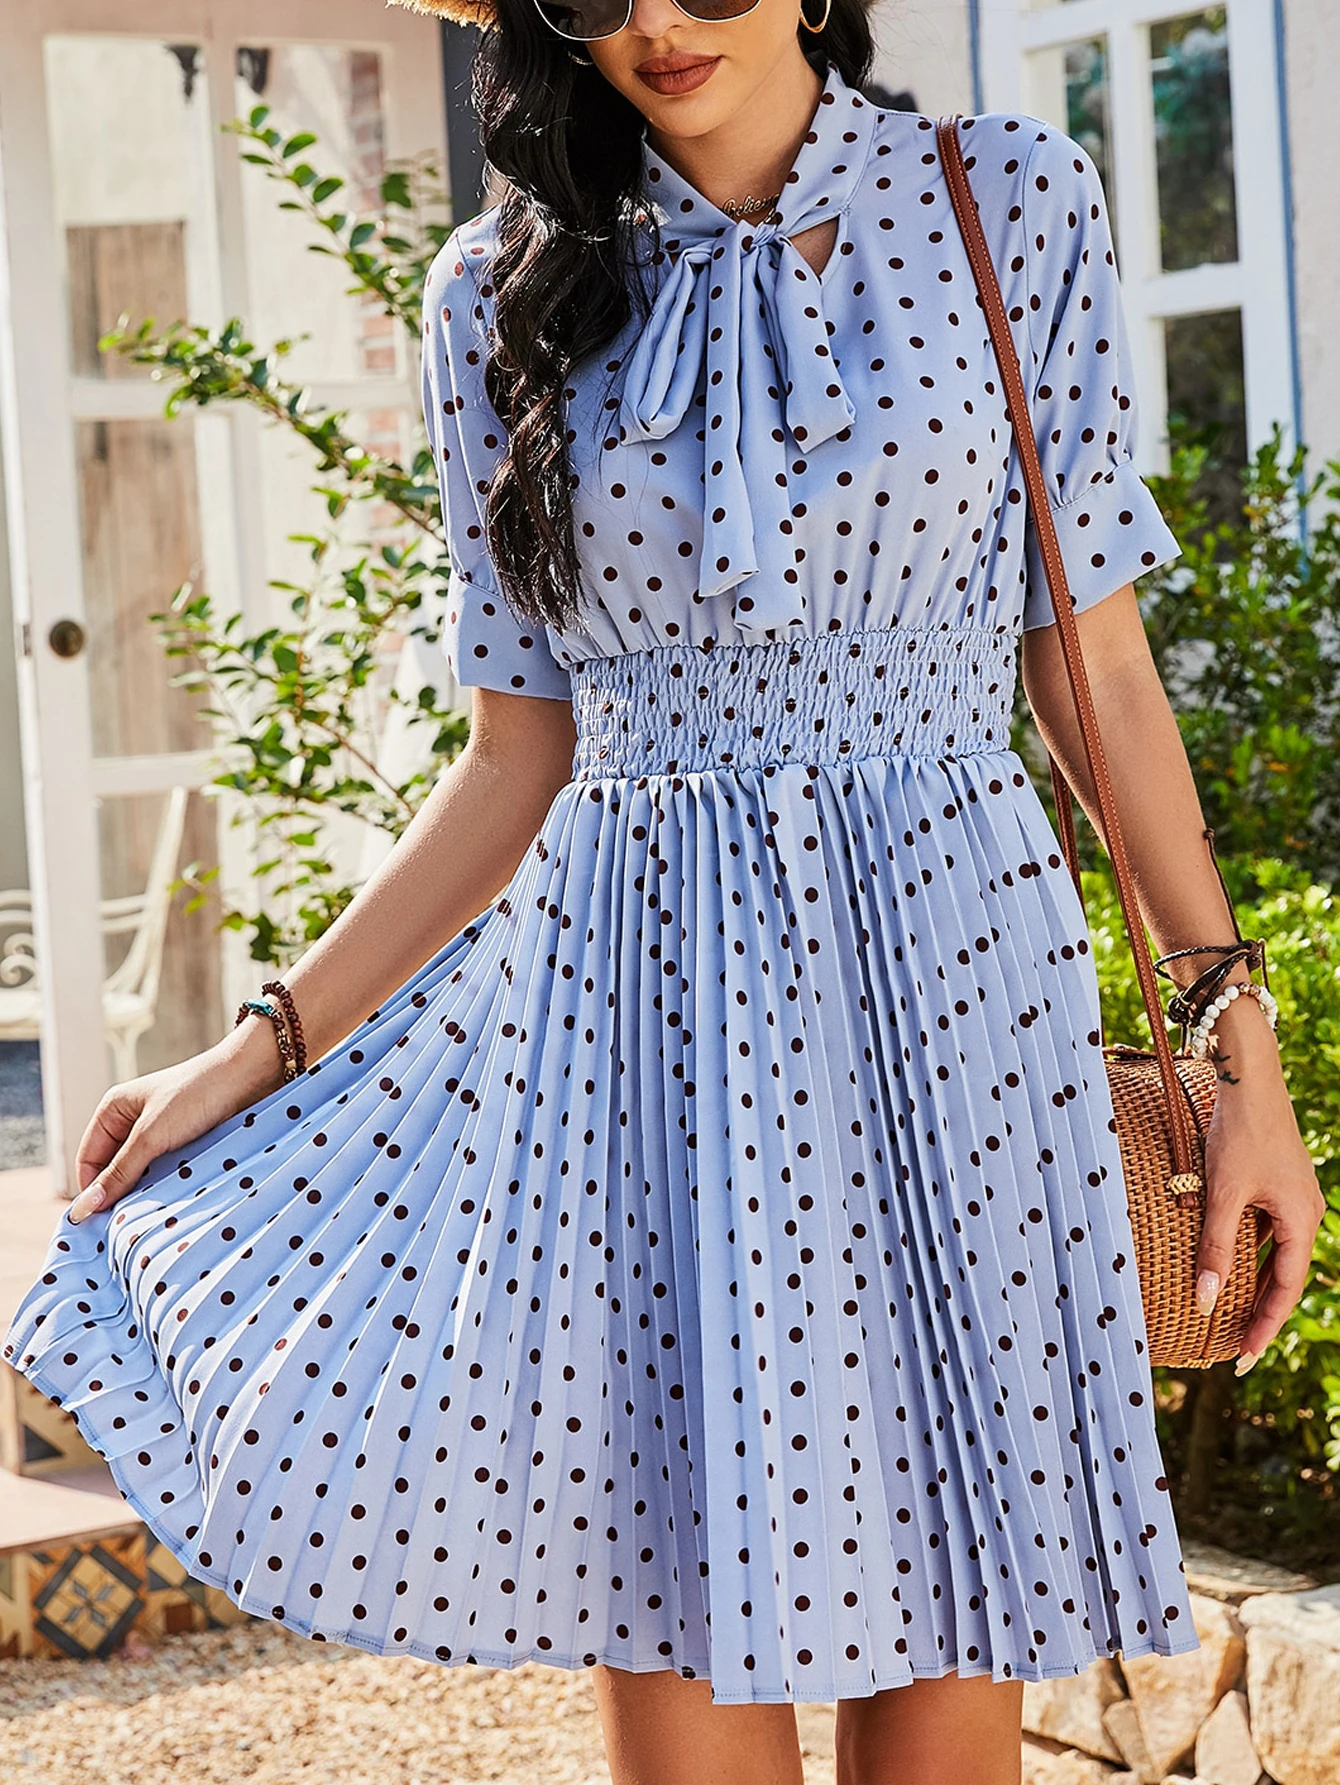 SummerPolka Dot Bow Tie Waist Dress Vacation Outfits elegant casual dress for women